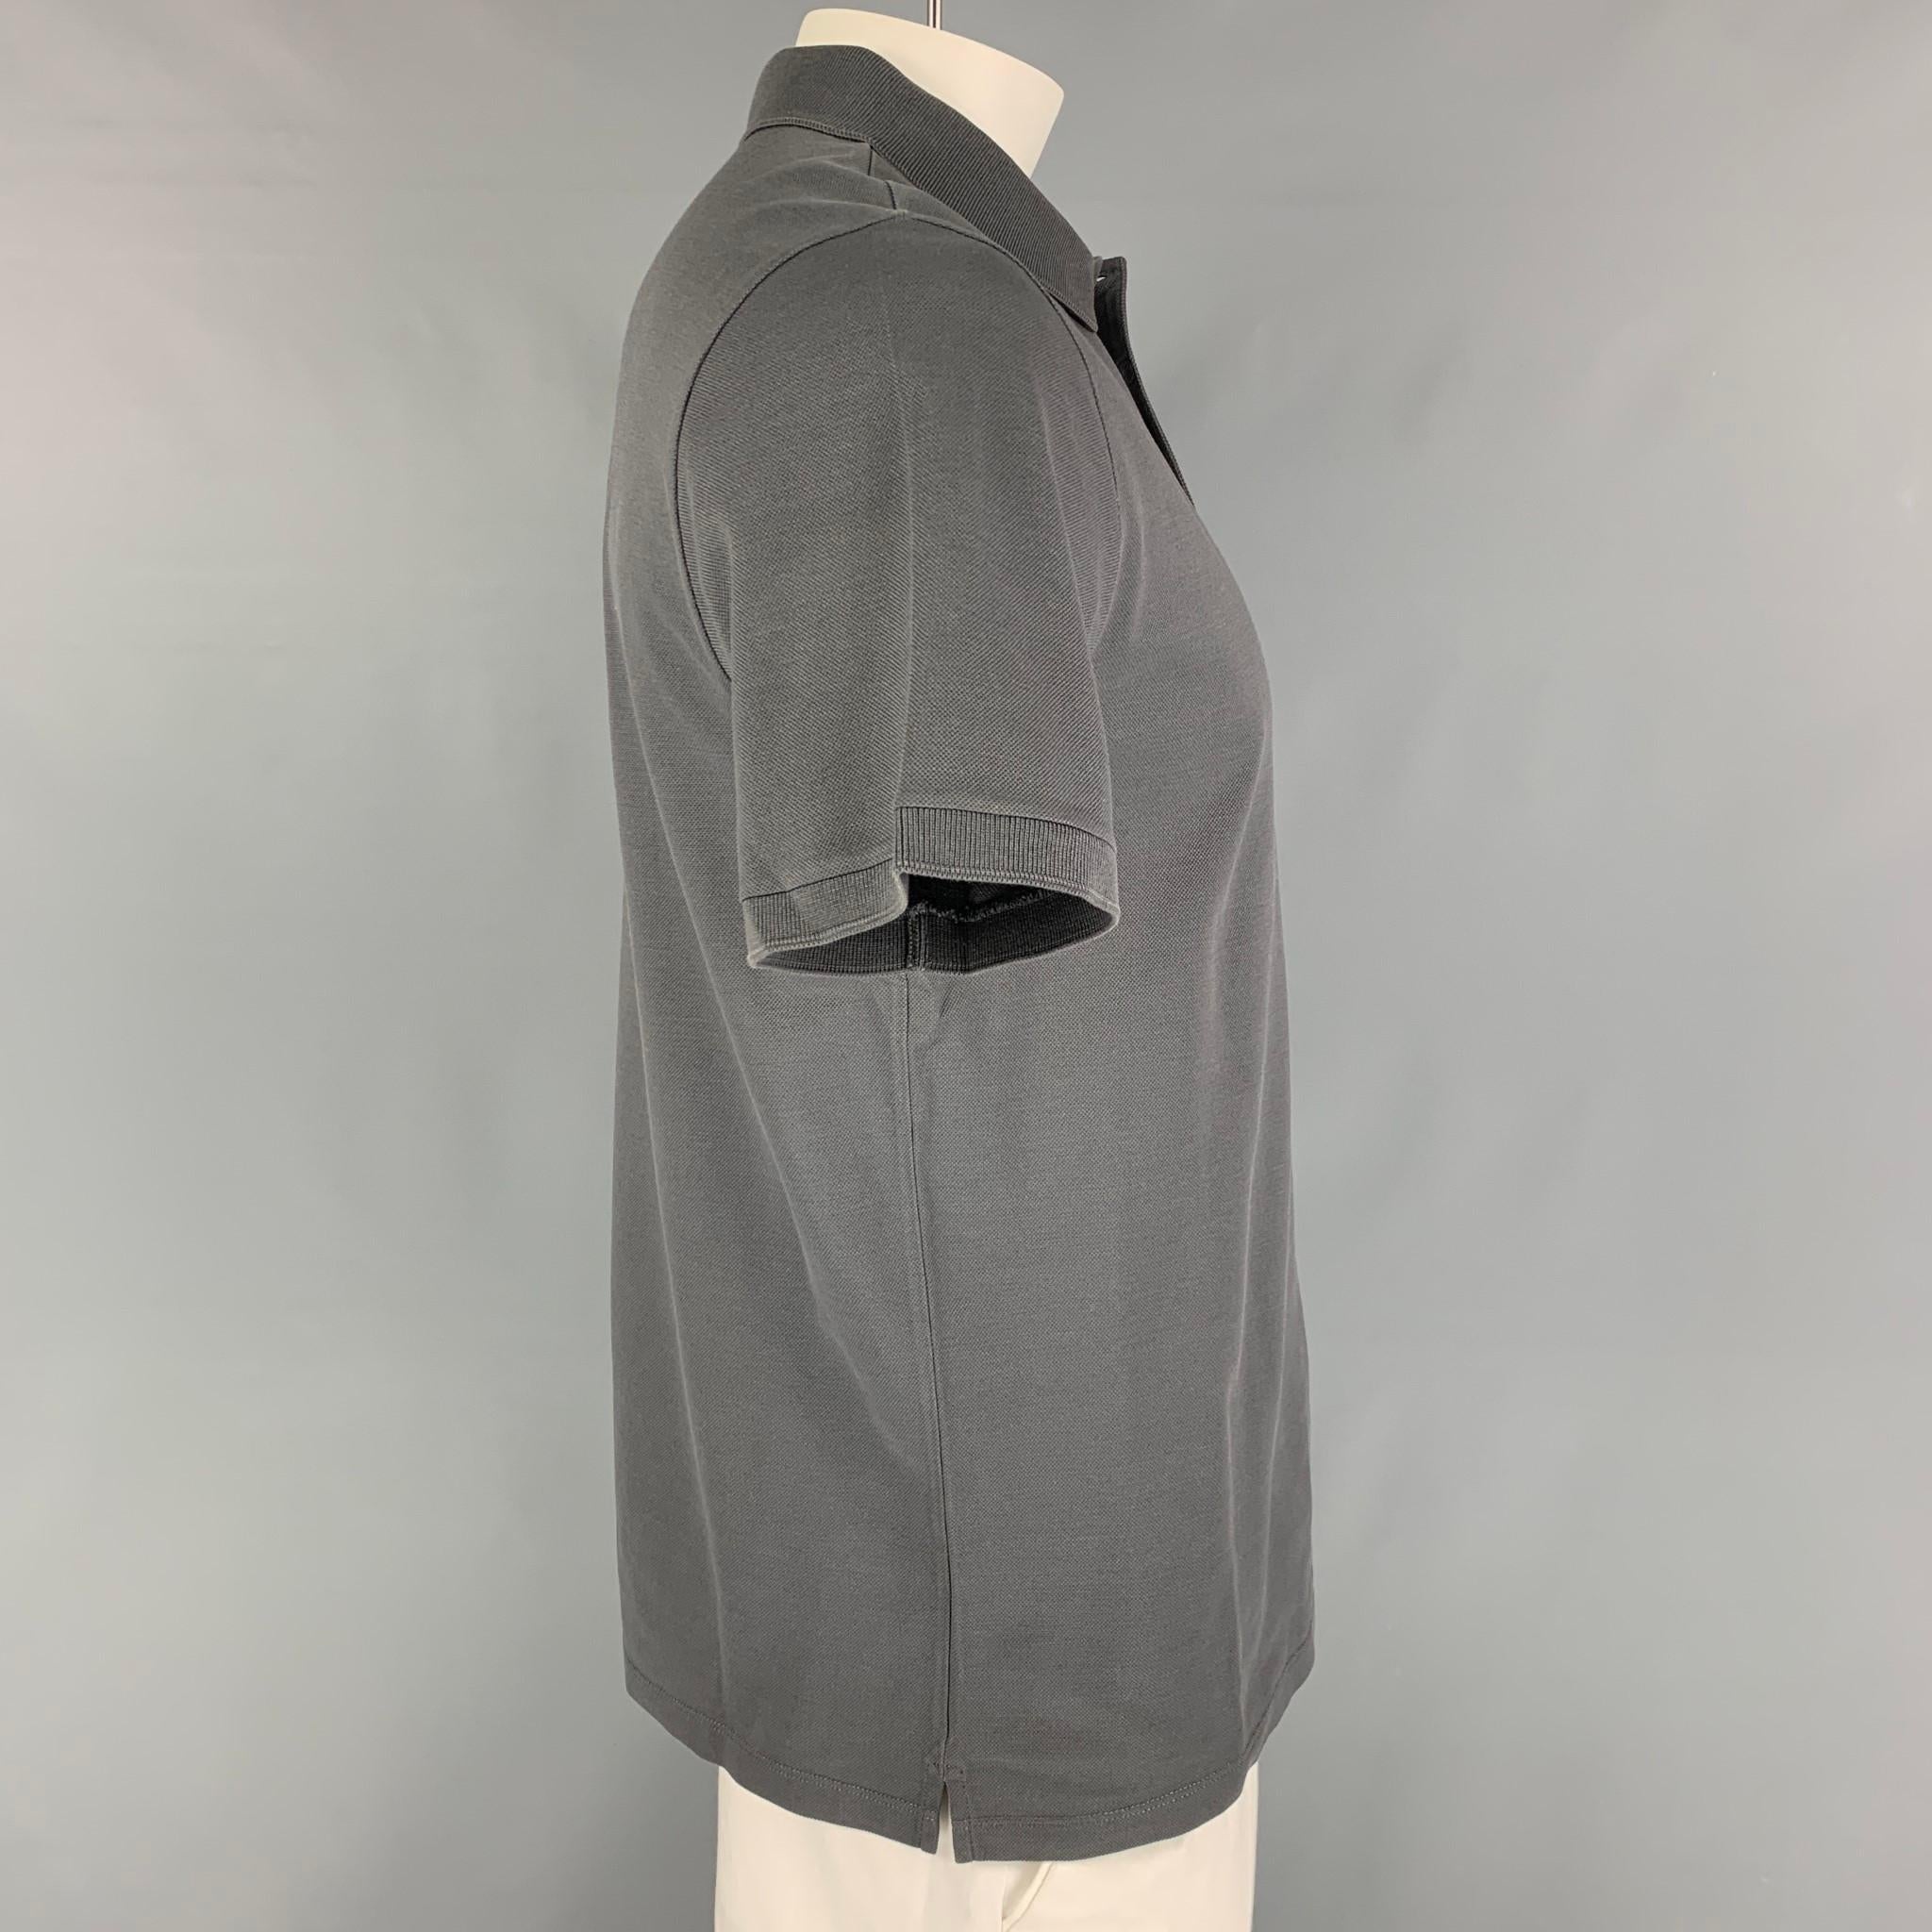 LOUIS VUITTON polo comes in a grey cotton featuring a embroidered logo, spread collar, and a half buttoned closure. Made in Italy. 

Excellent Pre-Owned Condition.
Marked: XL

Measurements:

Shoulder: 18.5 in.
Chest: 42 in.
Sleeve: 10 in.
Length: